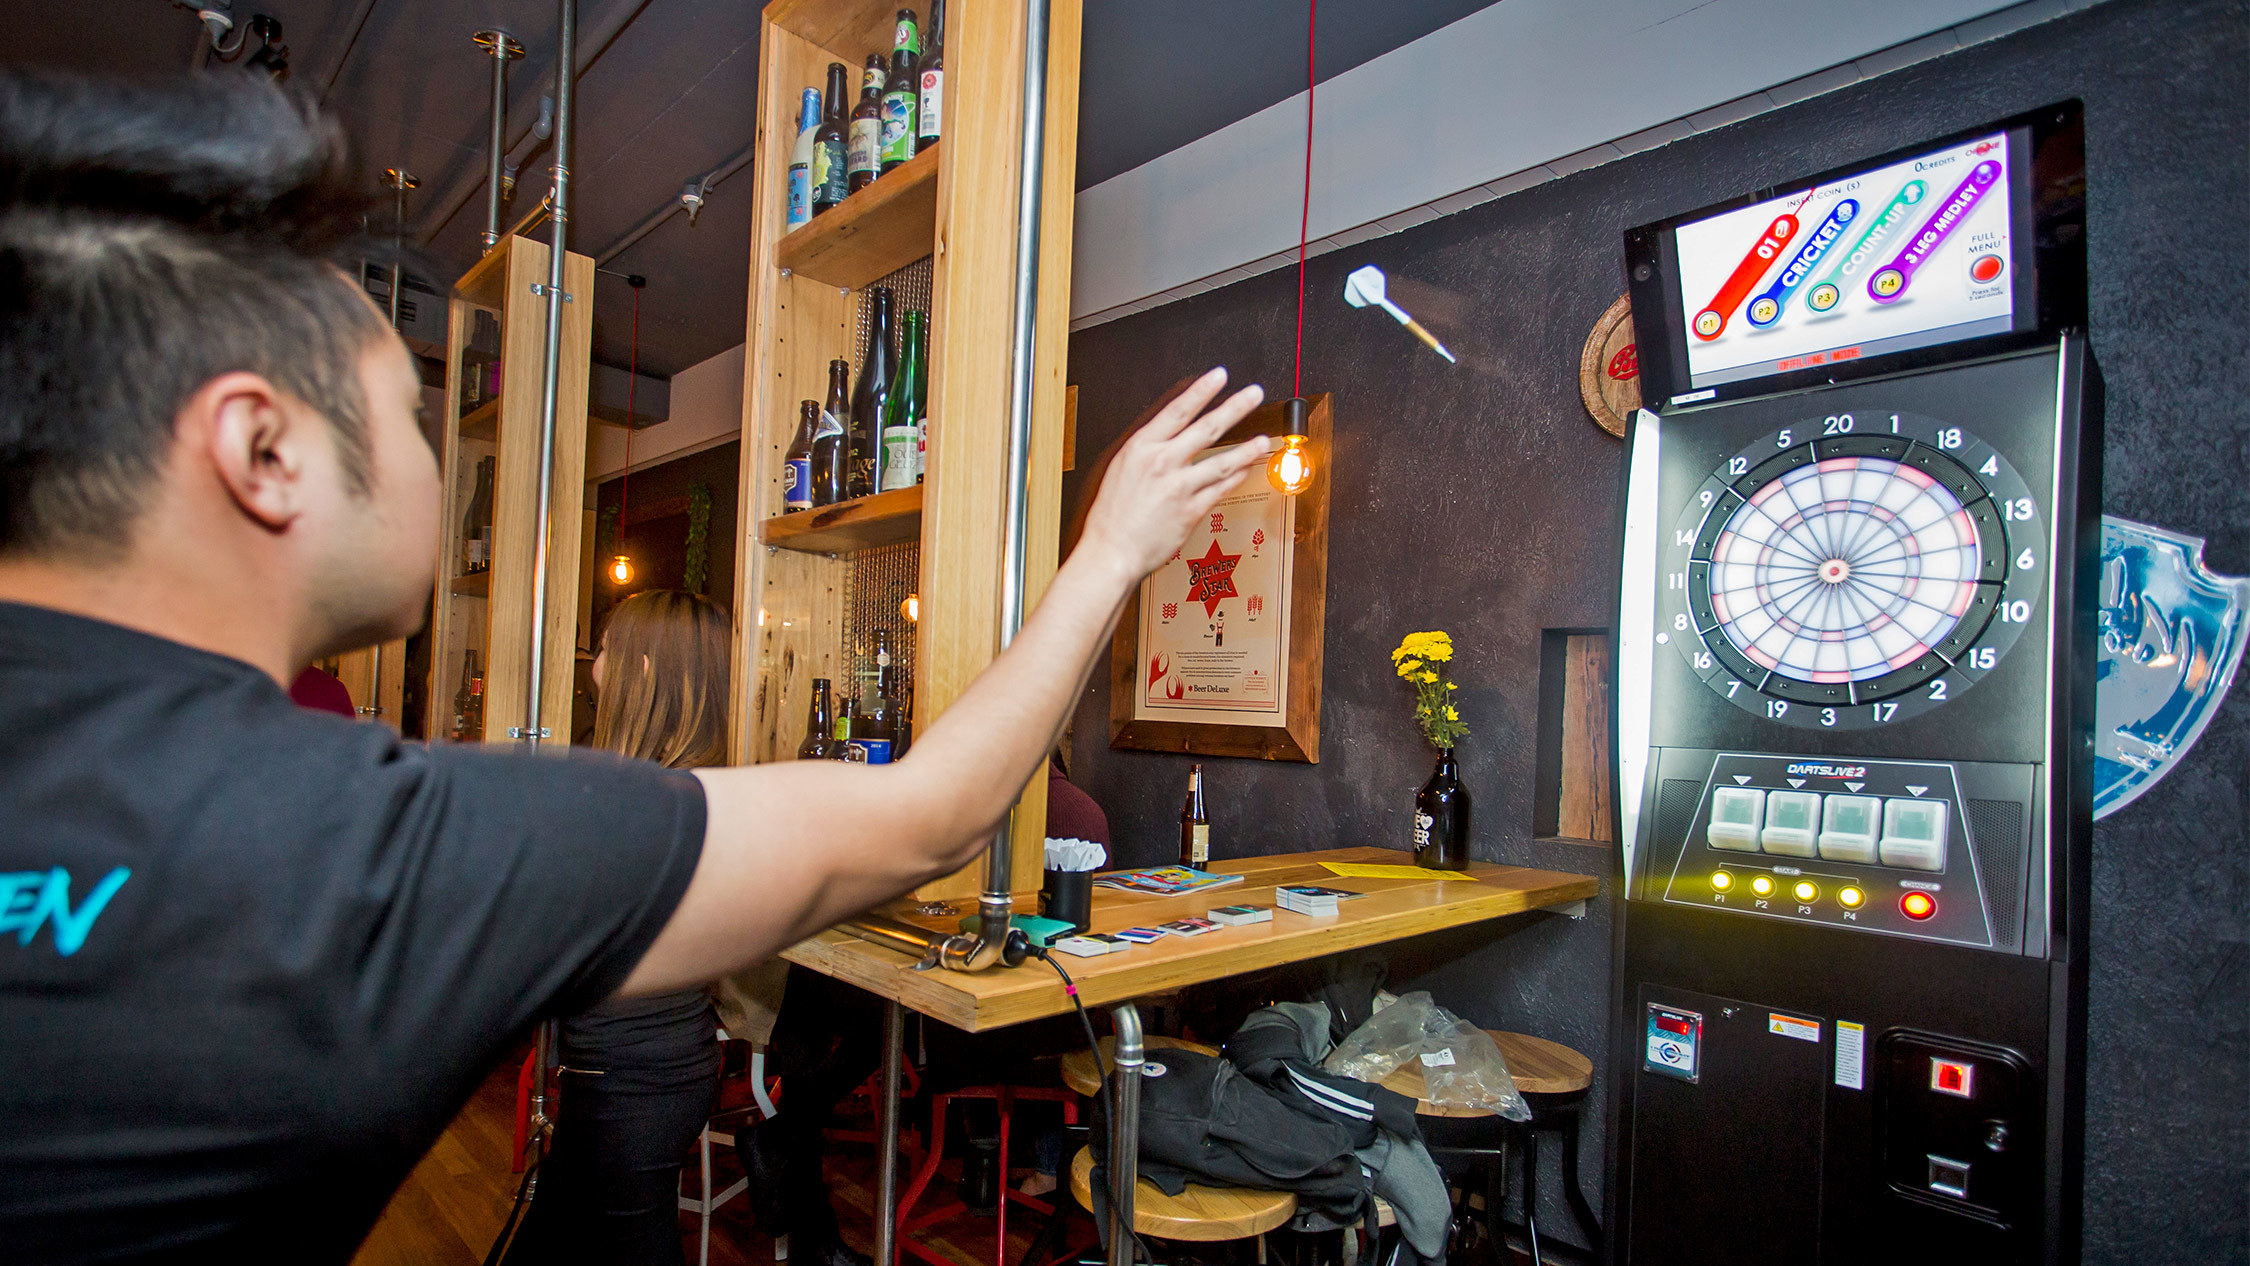 Where to play darts in Sydney